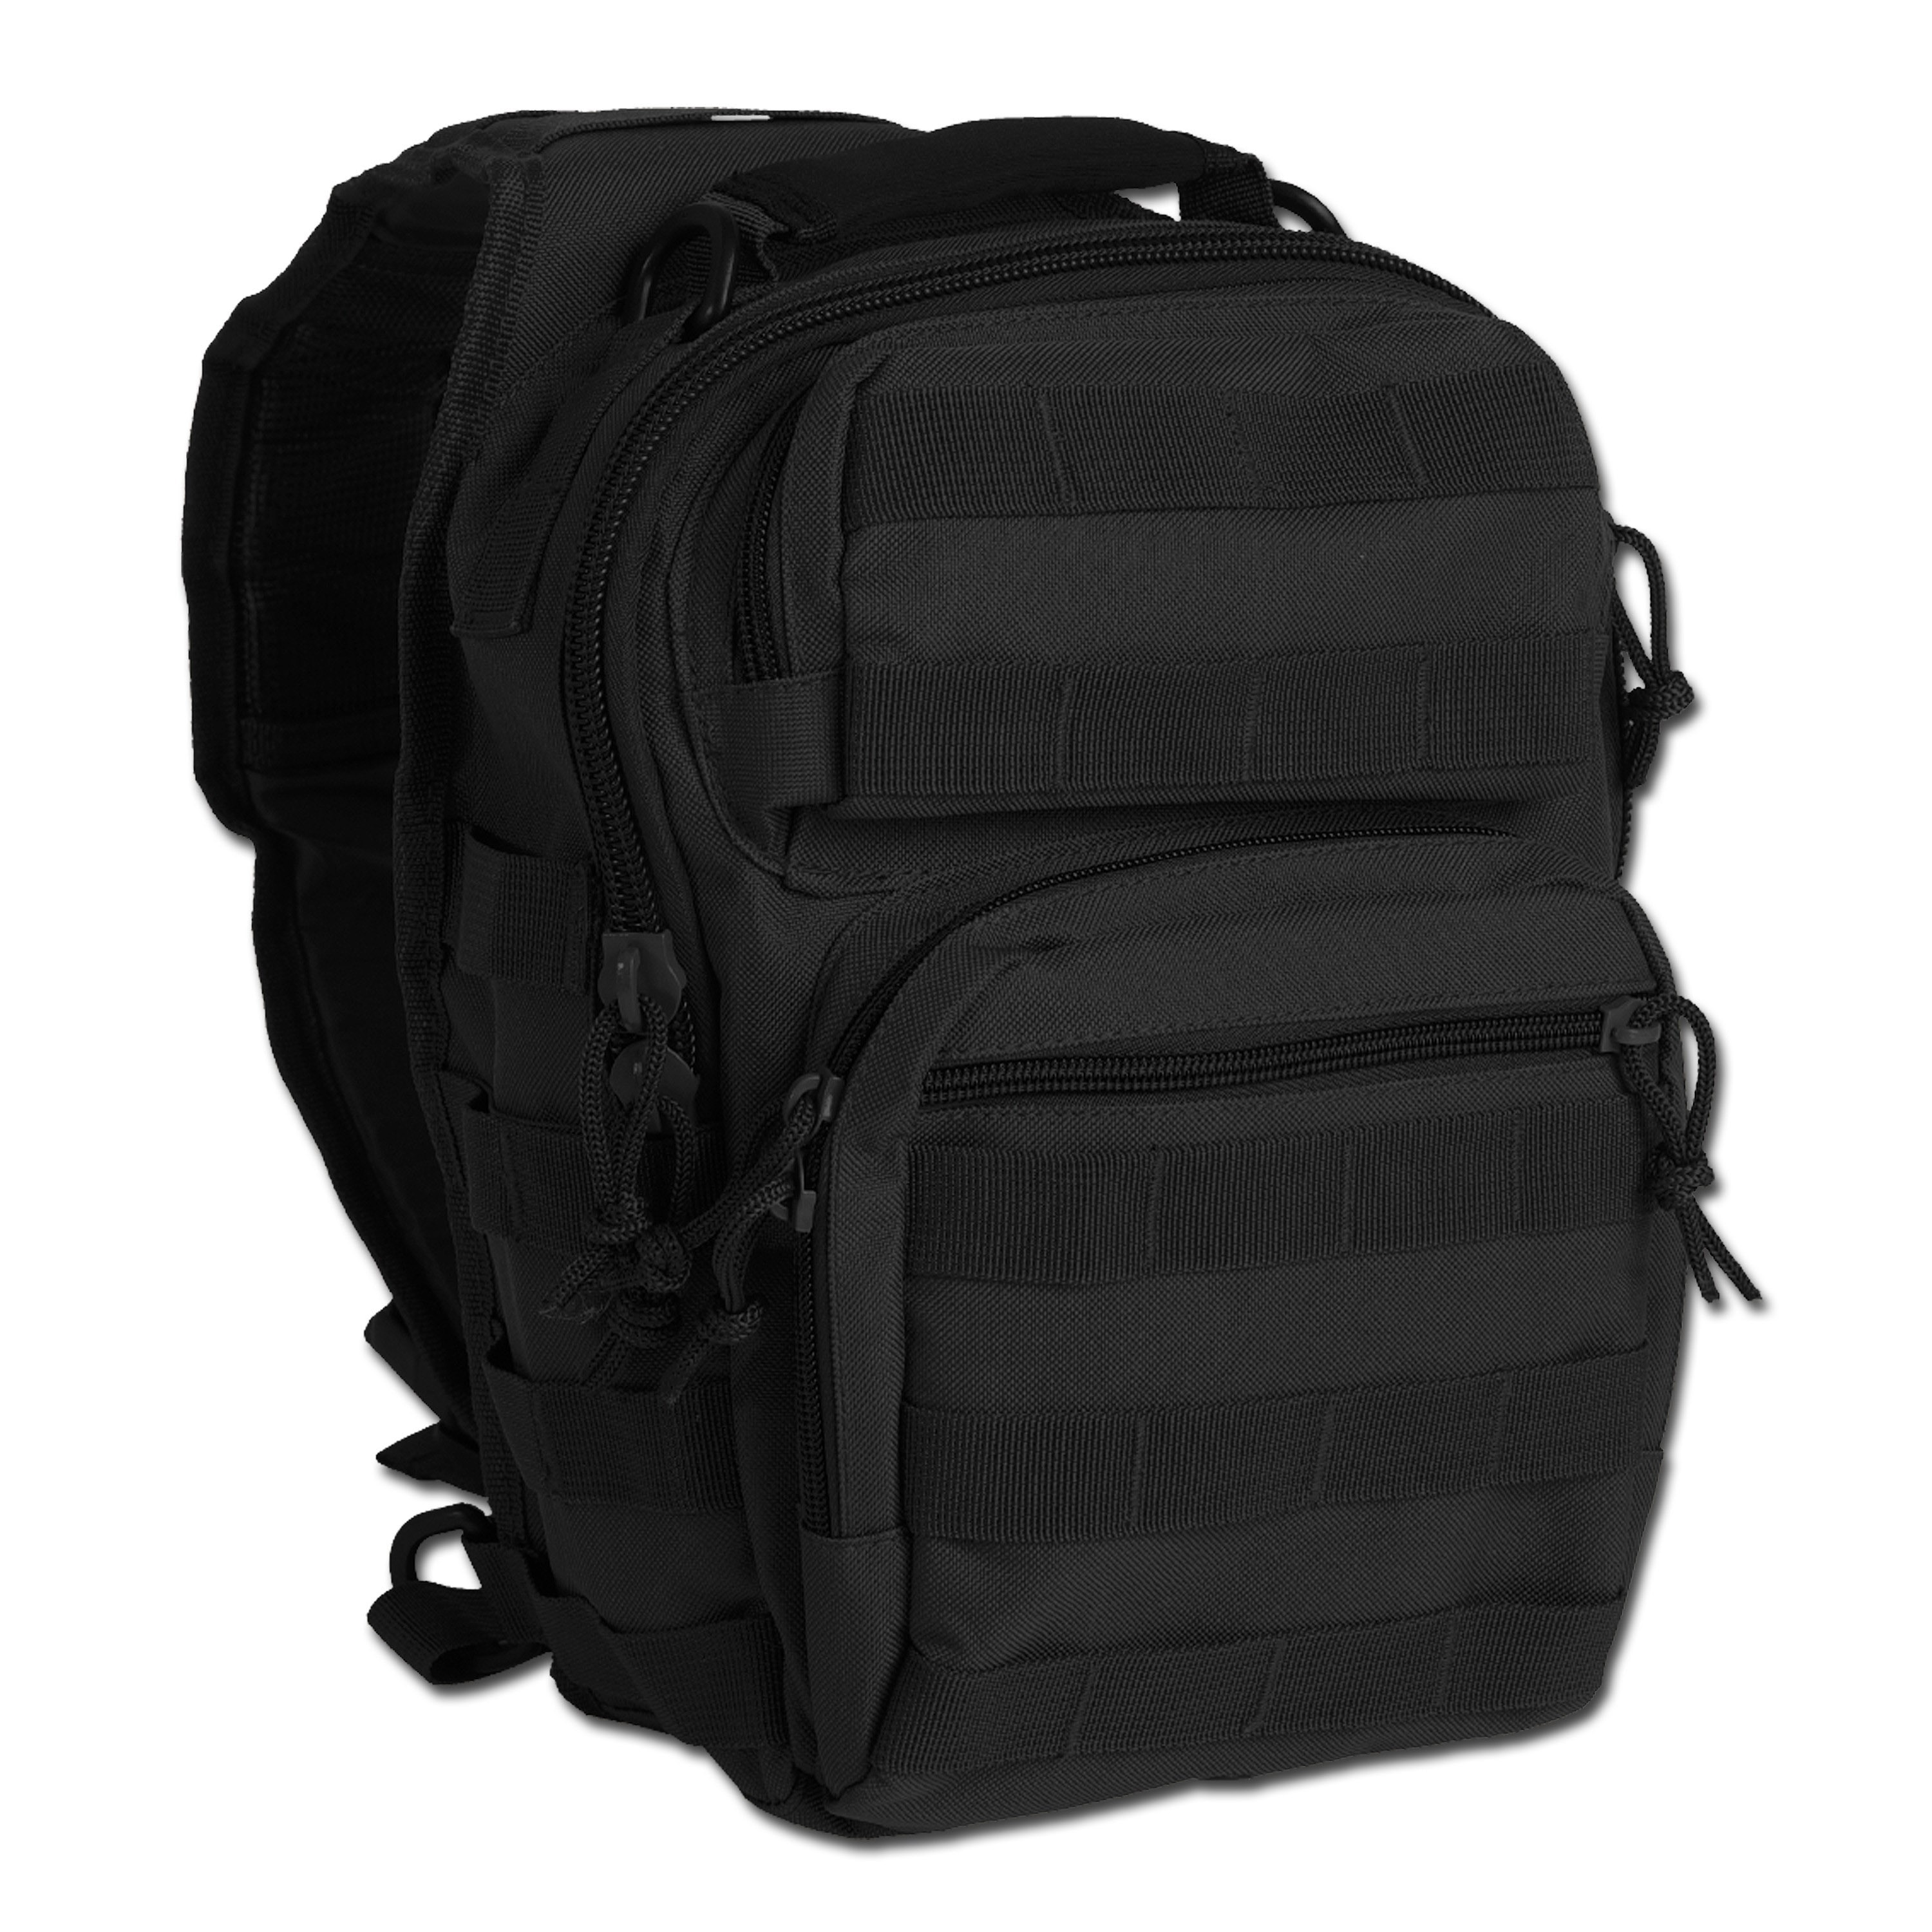 Purchase the One Strap Backpack Assault Pack Small black by ASMC